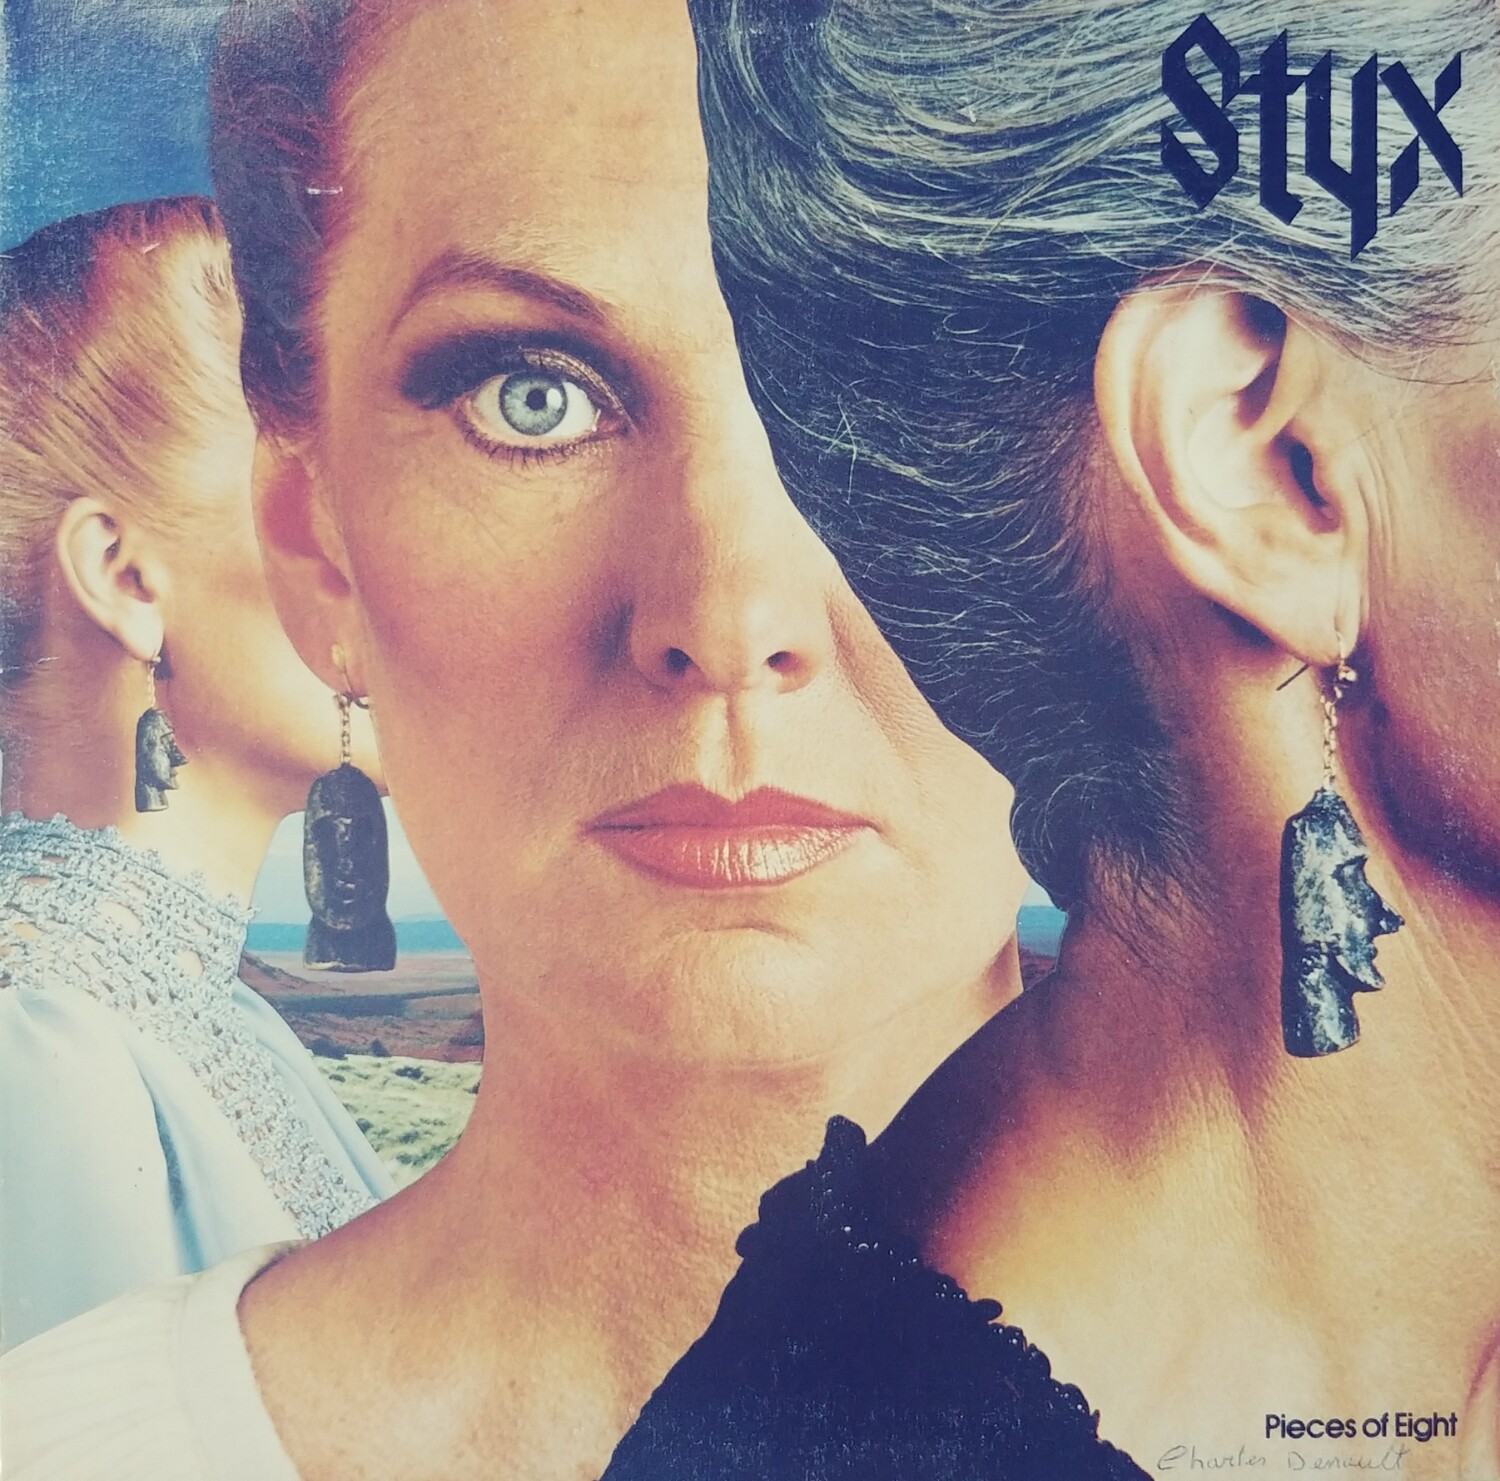 STYX - Pieces of eight